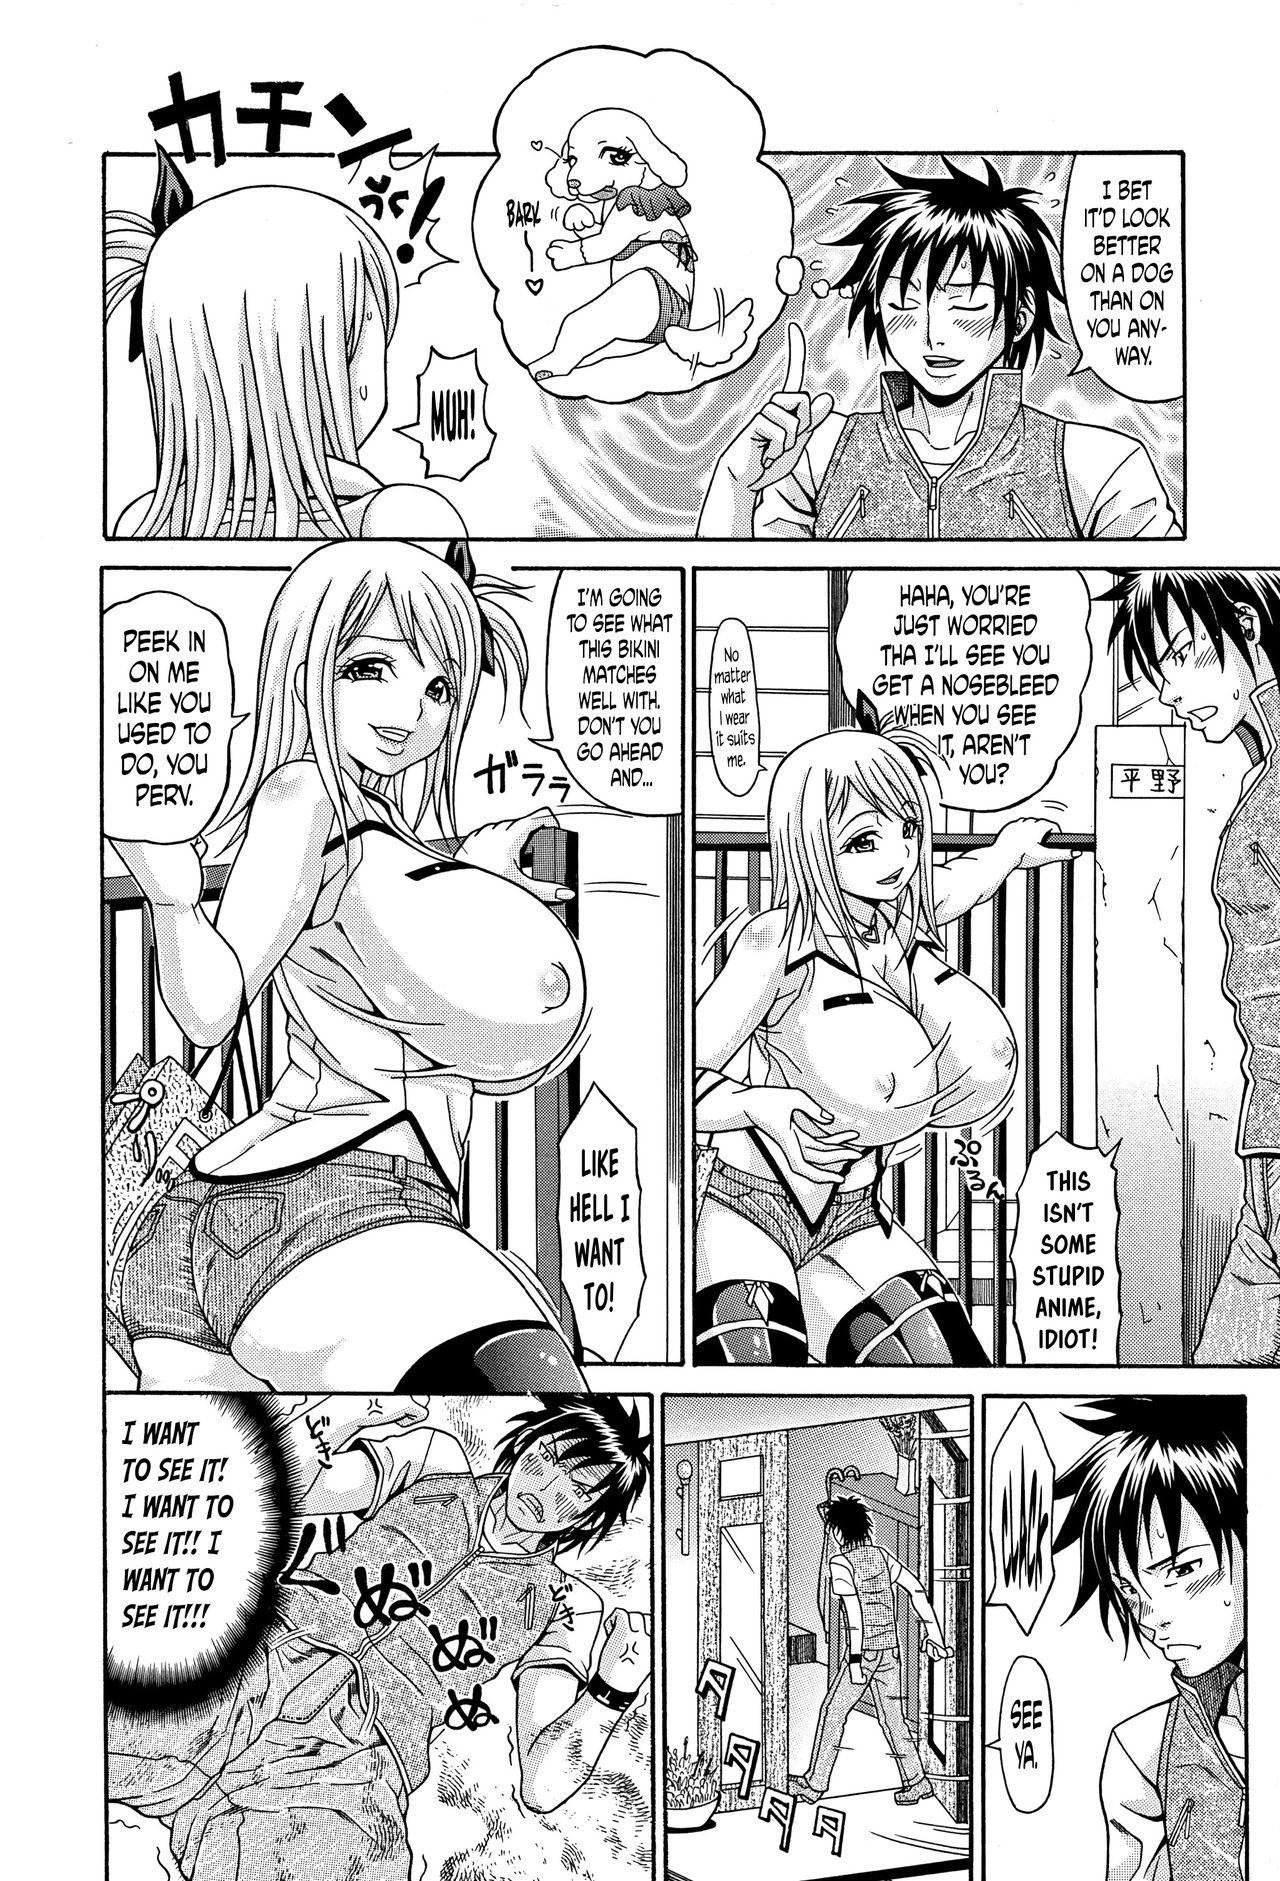 [Andou Hiroyuki] Mamire Chichi - Sticky Tits Feel Hot All Over. Ch.1-3 [English] [doujin-moe.us] 38